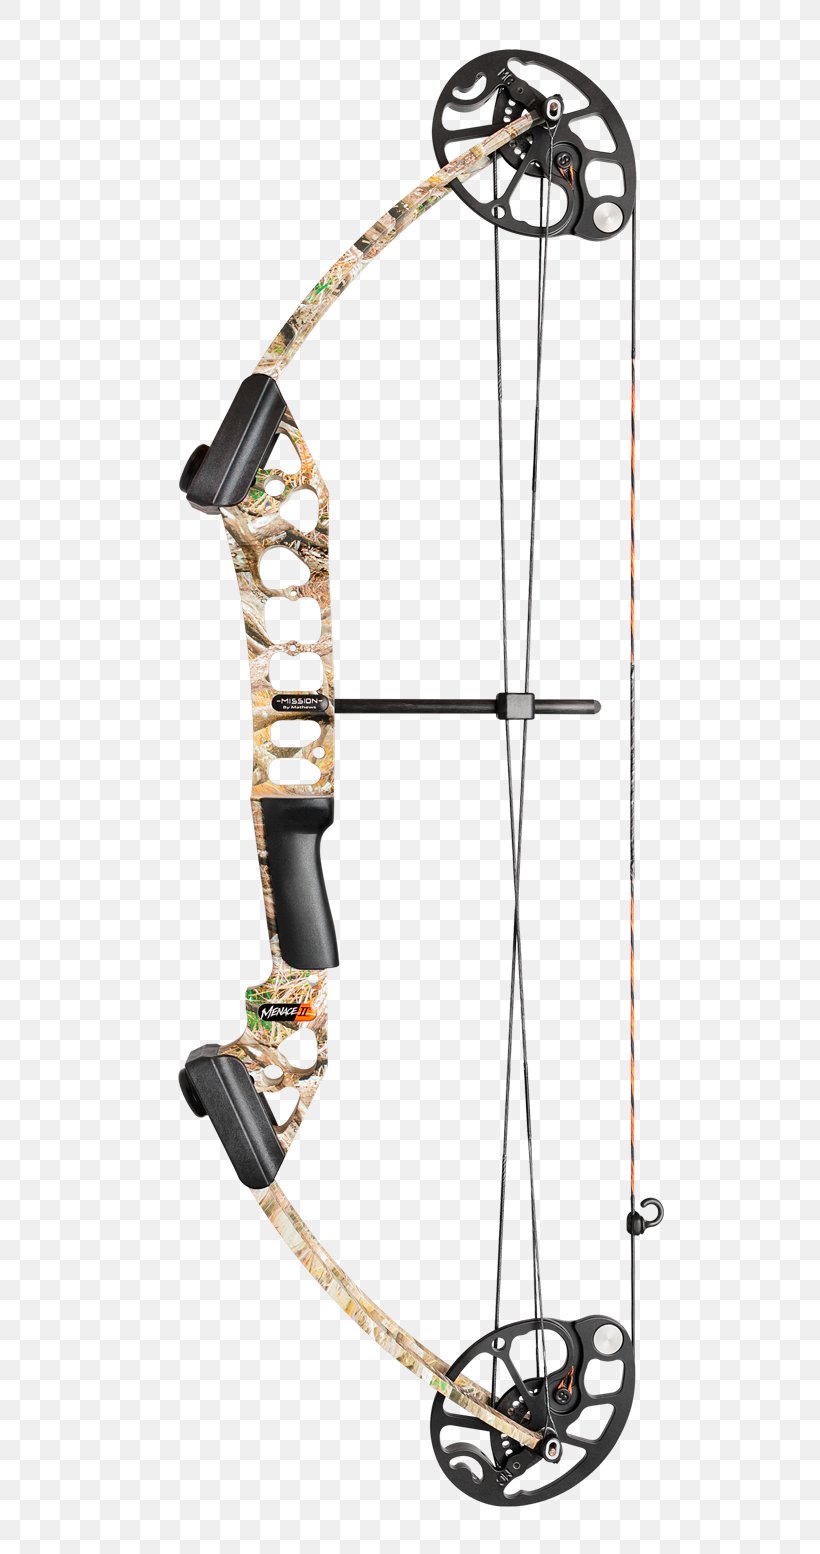 Archery Compound Bows Bow And Arrow Bowhunting Stabiliser, PNG, 812x1554px, Archery, Borkholder Archery, Bow, Bow And Arrow, Bowfishing Download Free